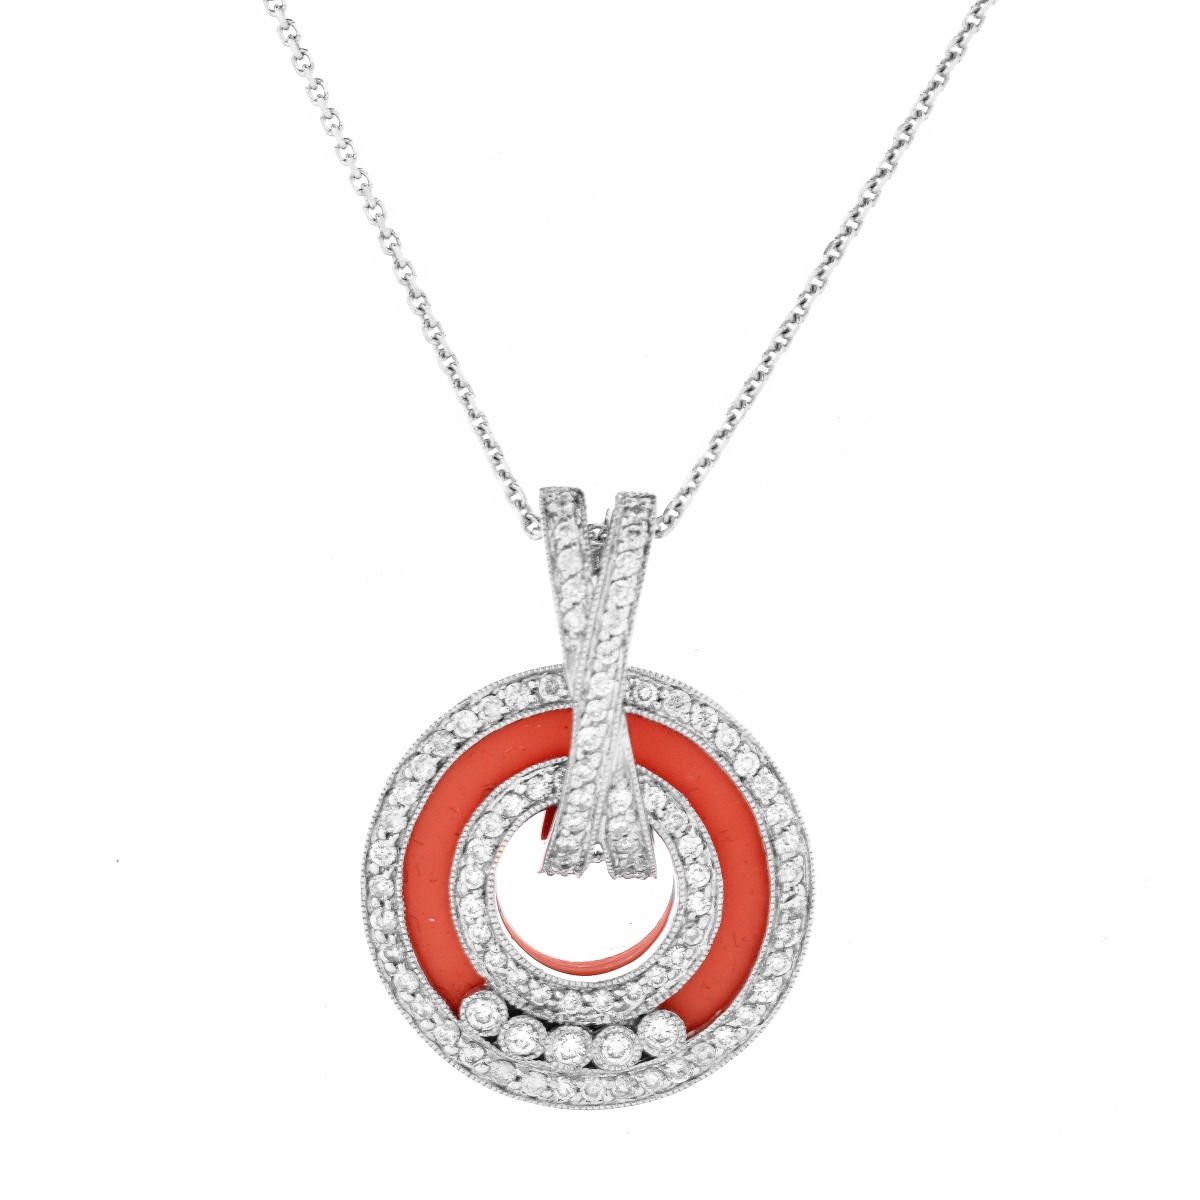 Diamond, Coral and 18K Pendant Necklace